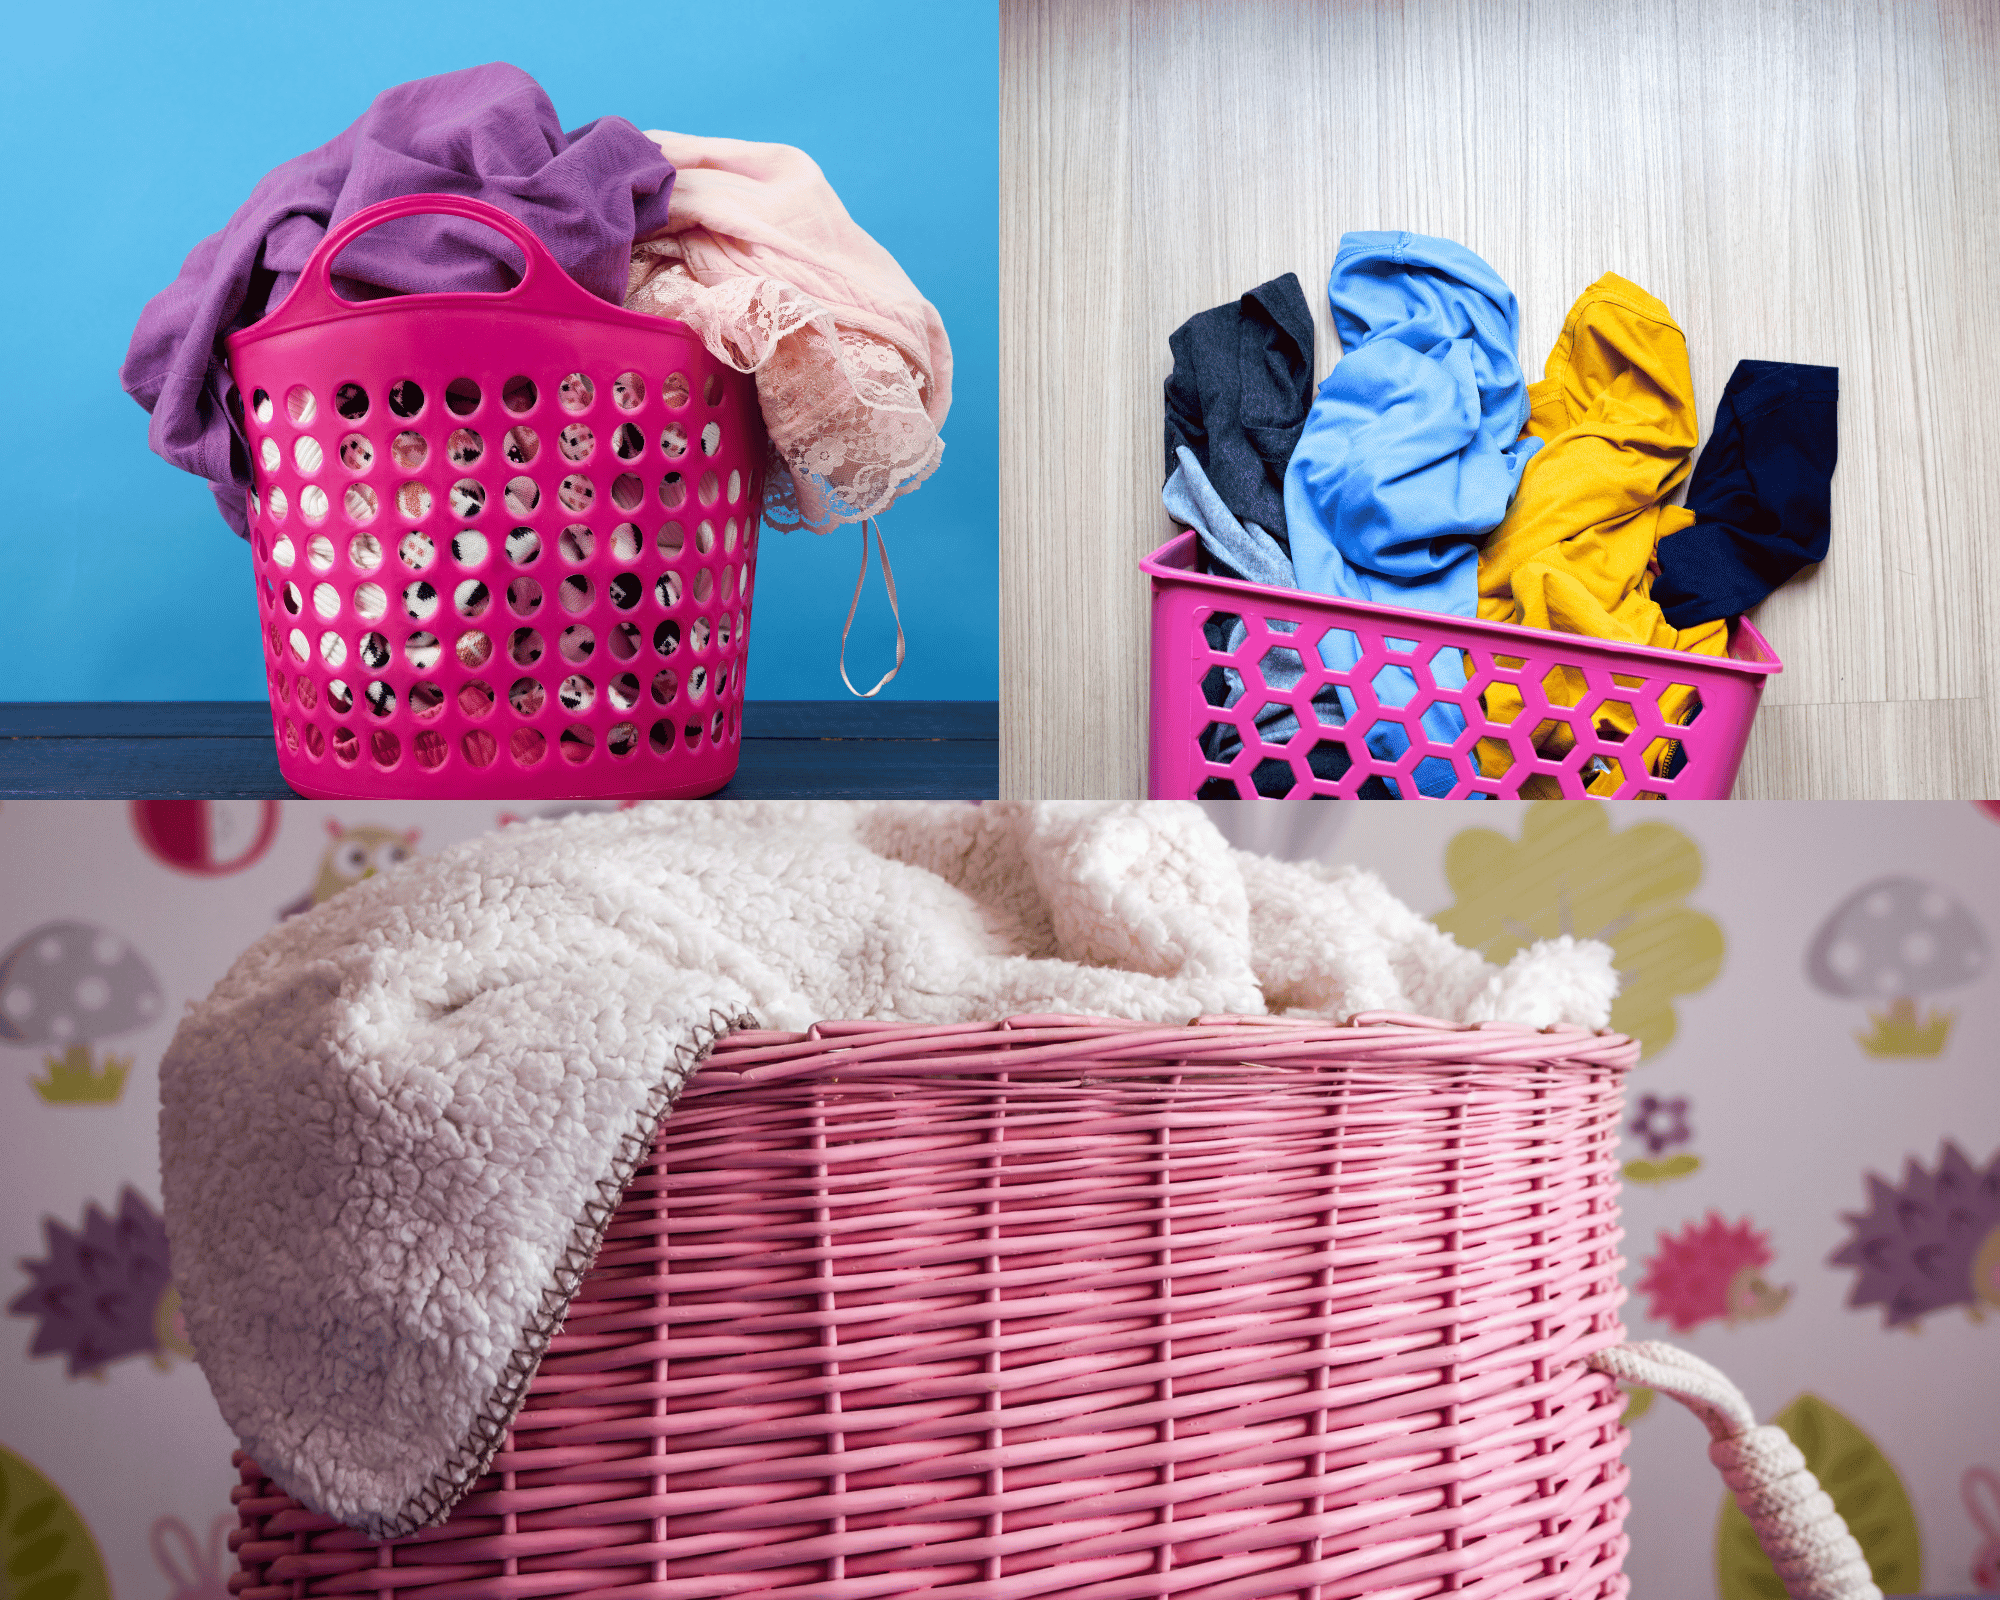 Pink Laundry Basket: That Will Make Laundry Day a Breeze!